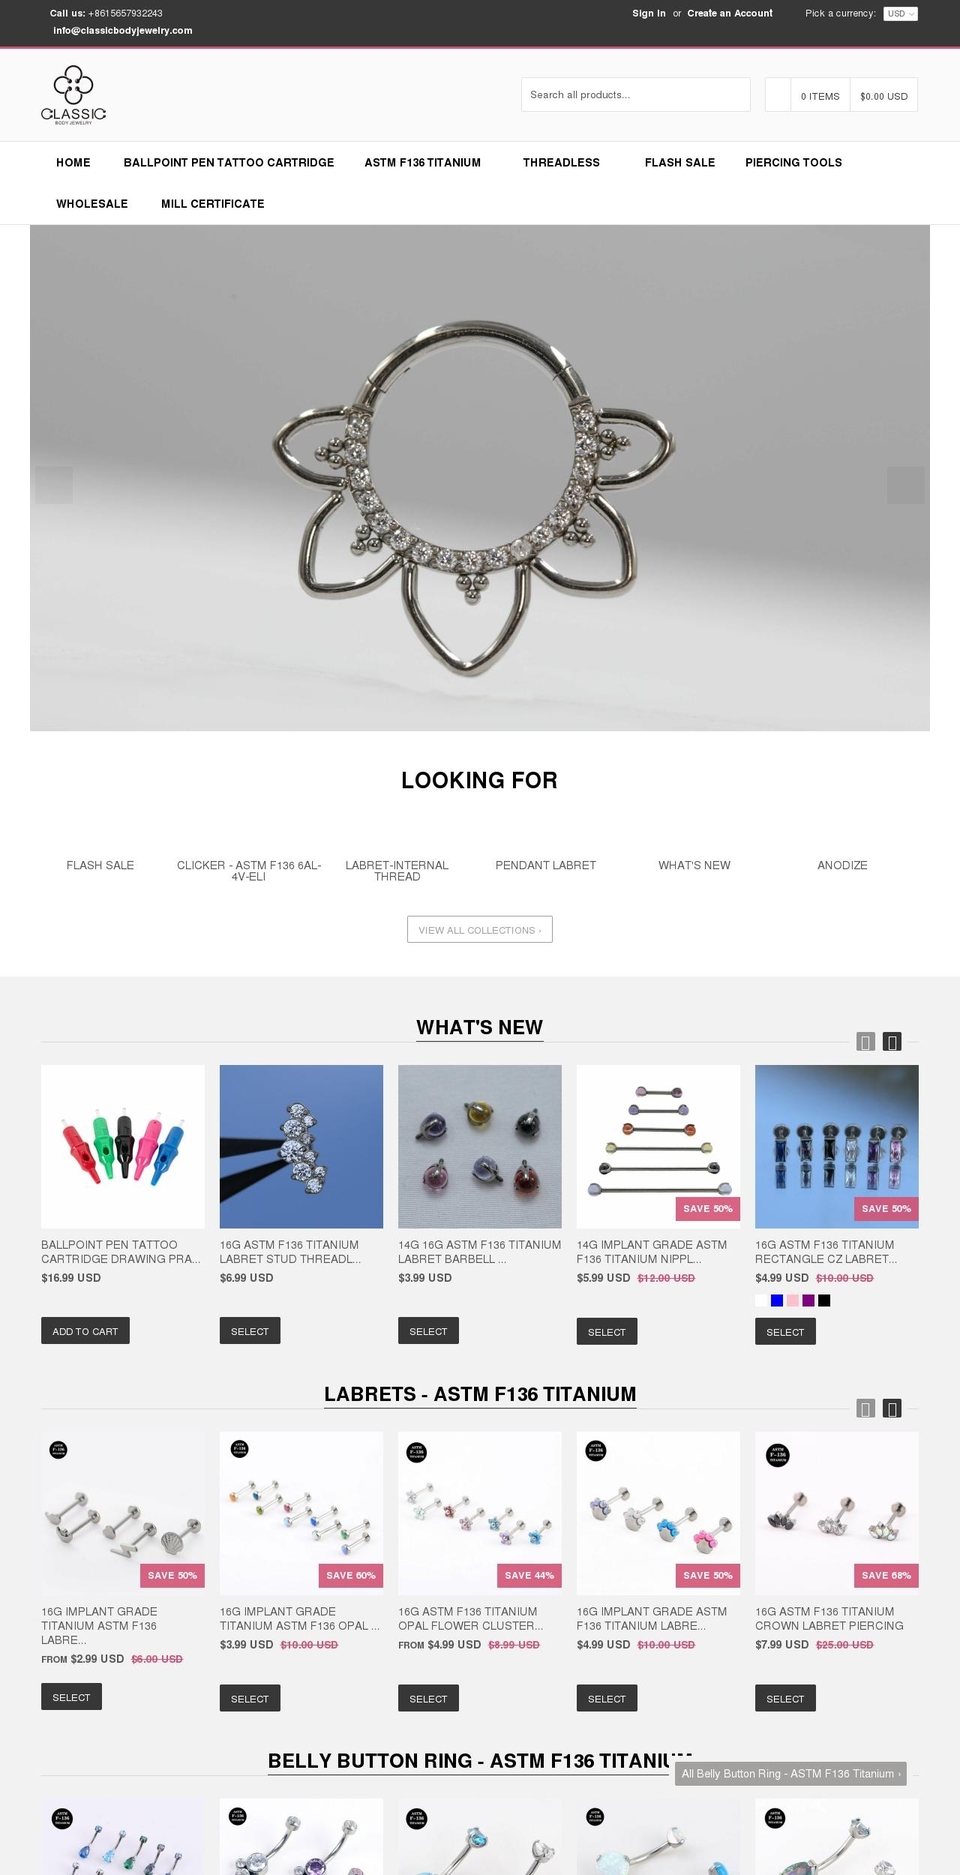 qrack Shopify theme site example classicbodyjewelry.com